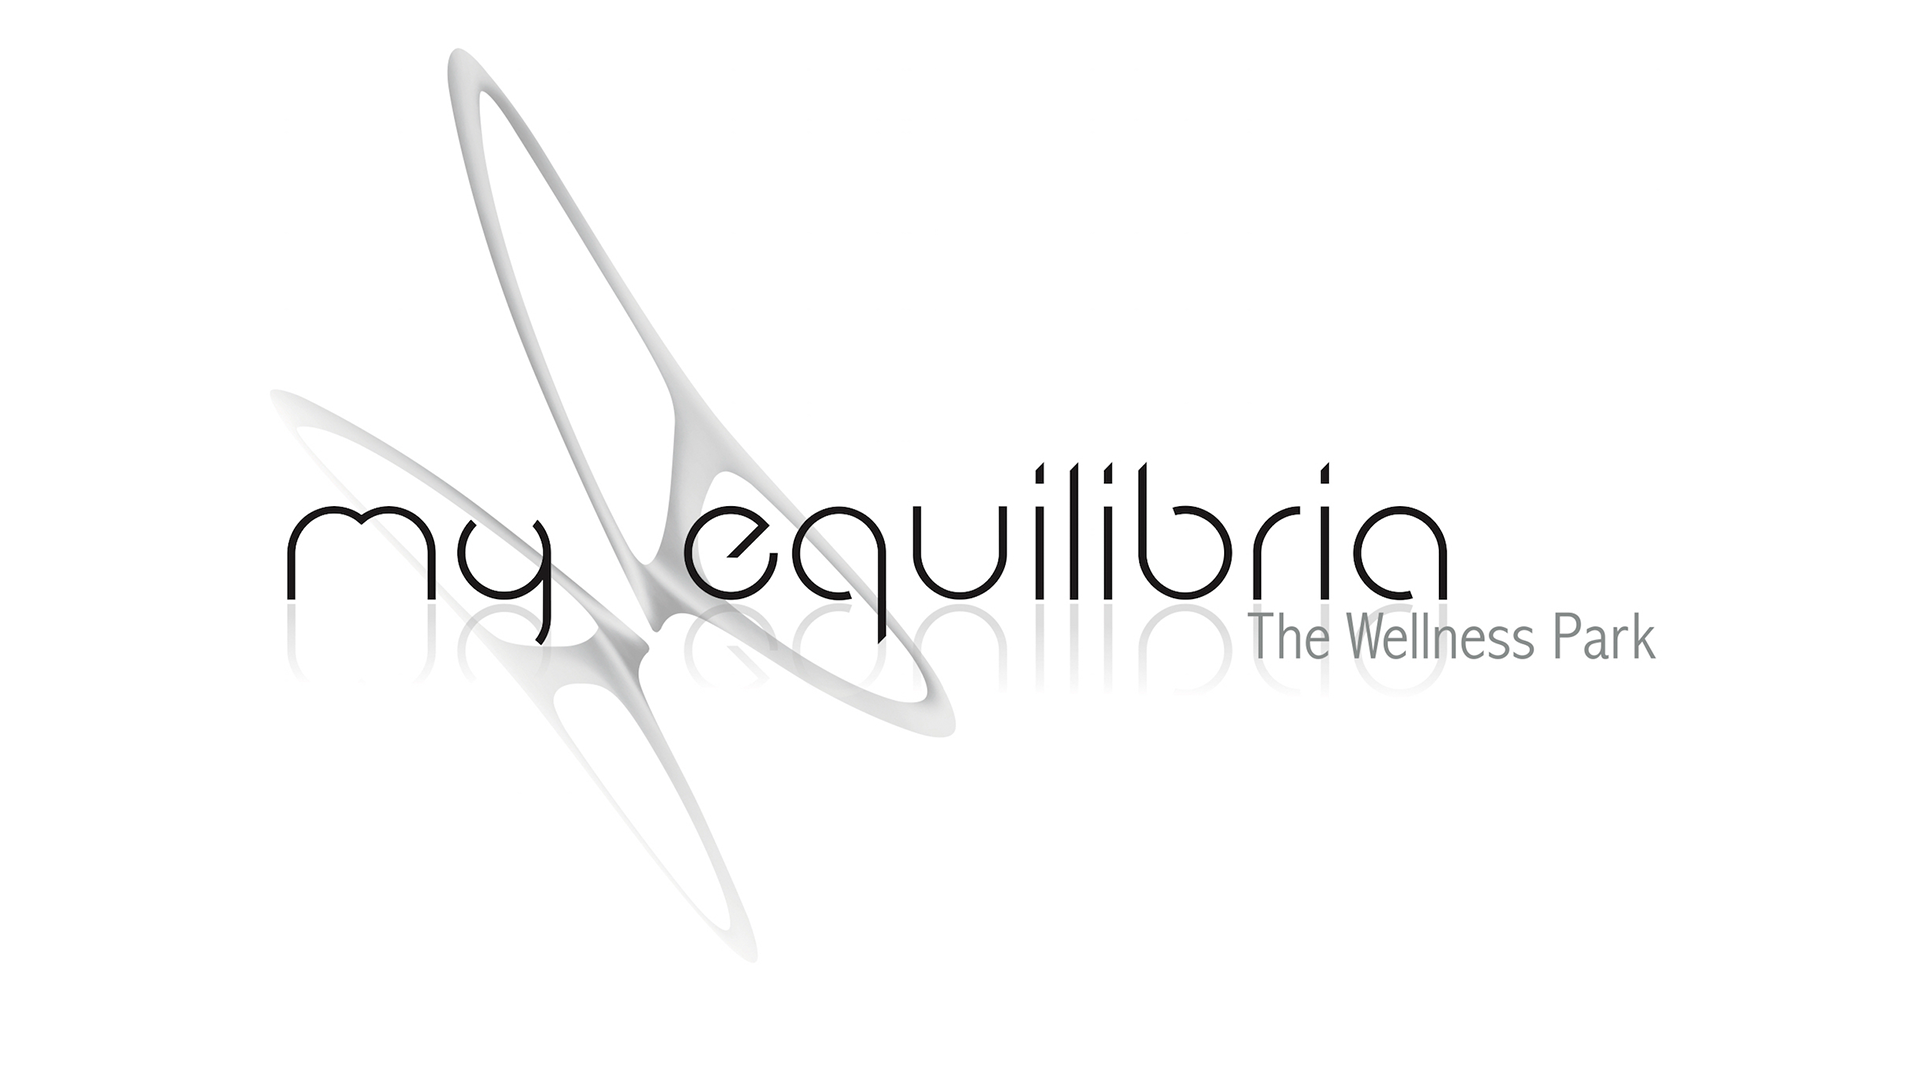 A logo of my equilibria, the wellness company.